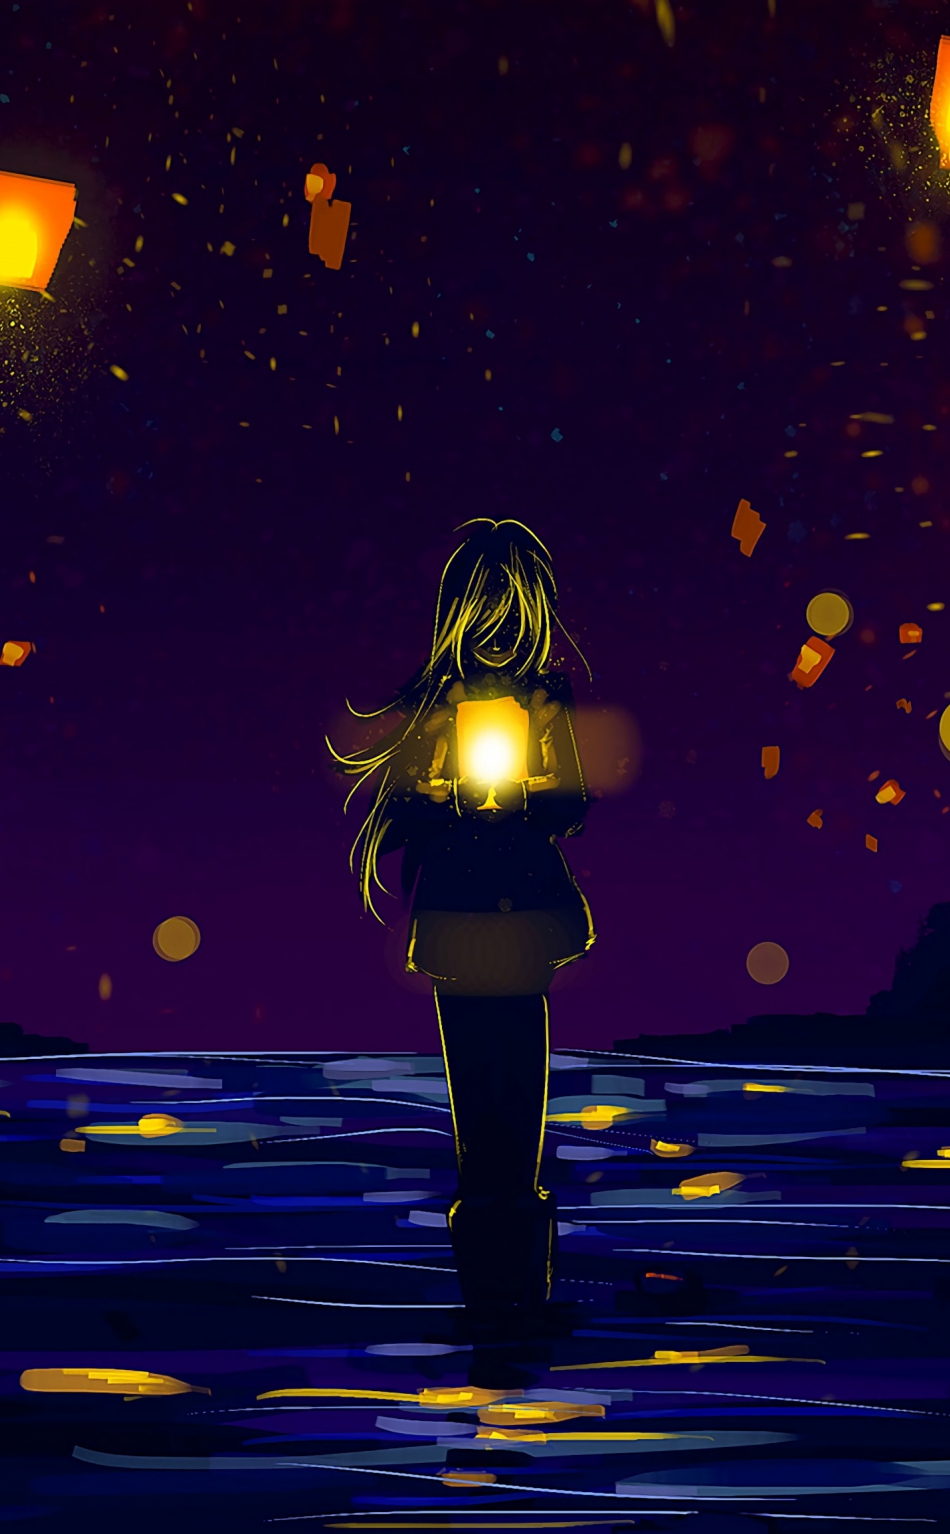 Download wallpaper 950x1534 anime girl, lanterns, silhouette, lonely, night  out, iphone, 950x1534 hd background, 15001